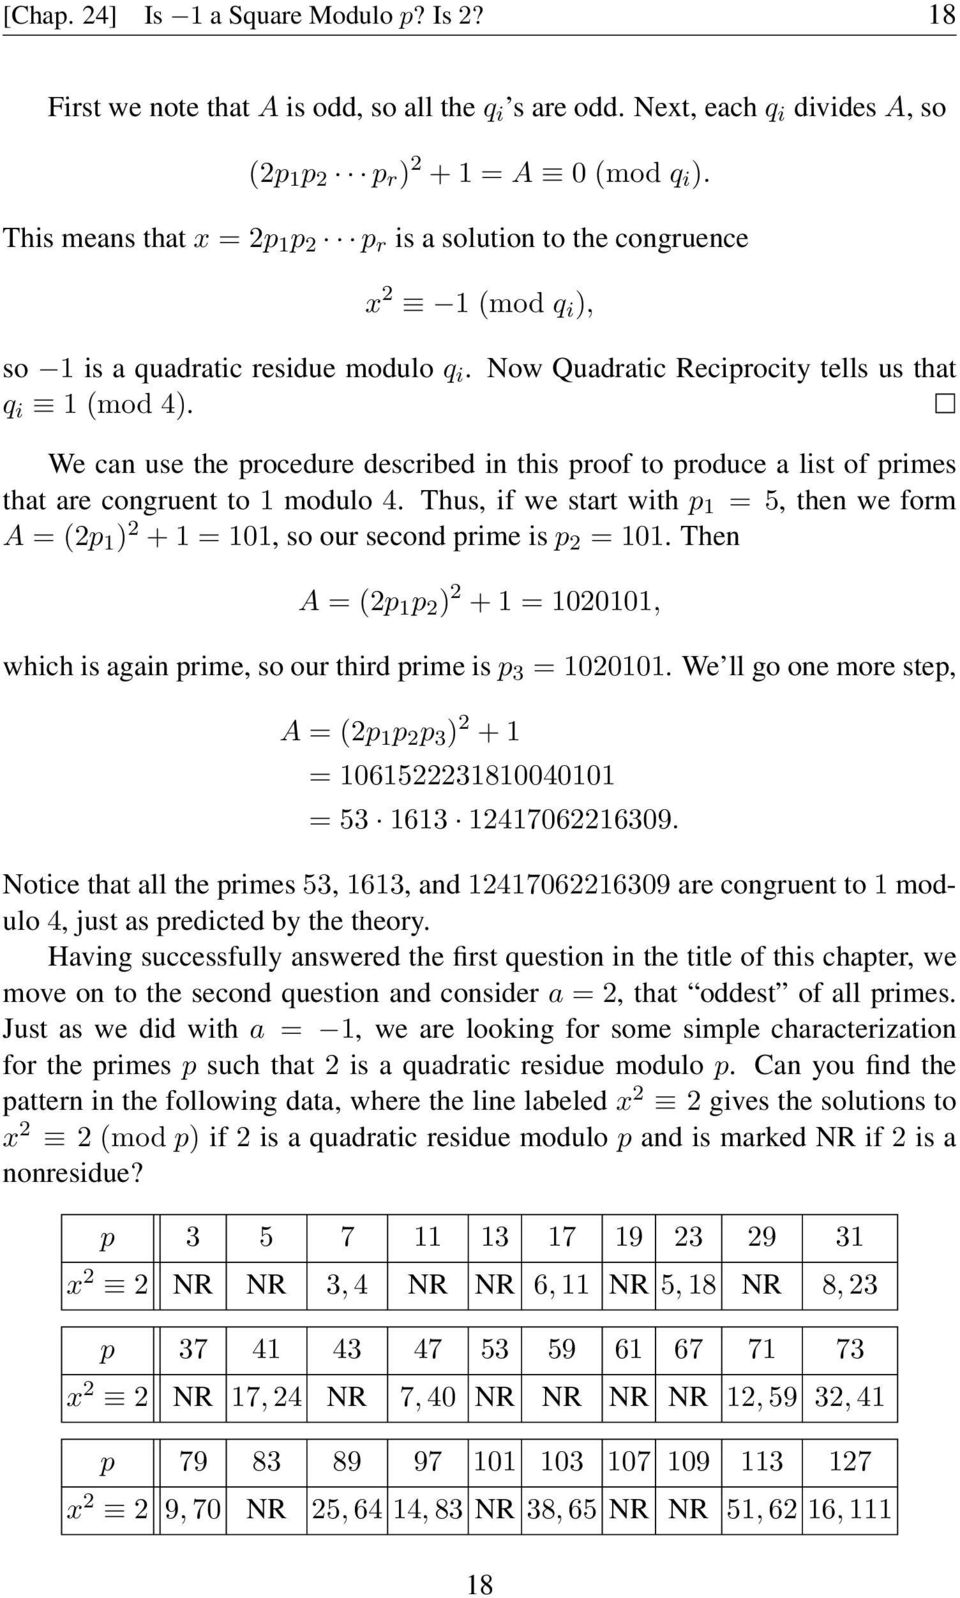 We can use the procedure described in this proof to produce a list of primes that are congruent to 1 modulo 4.